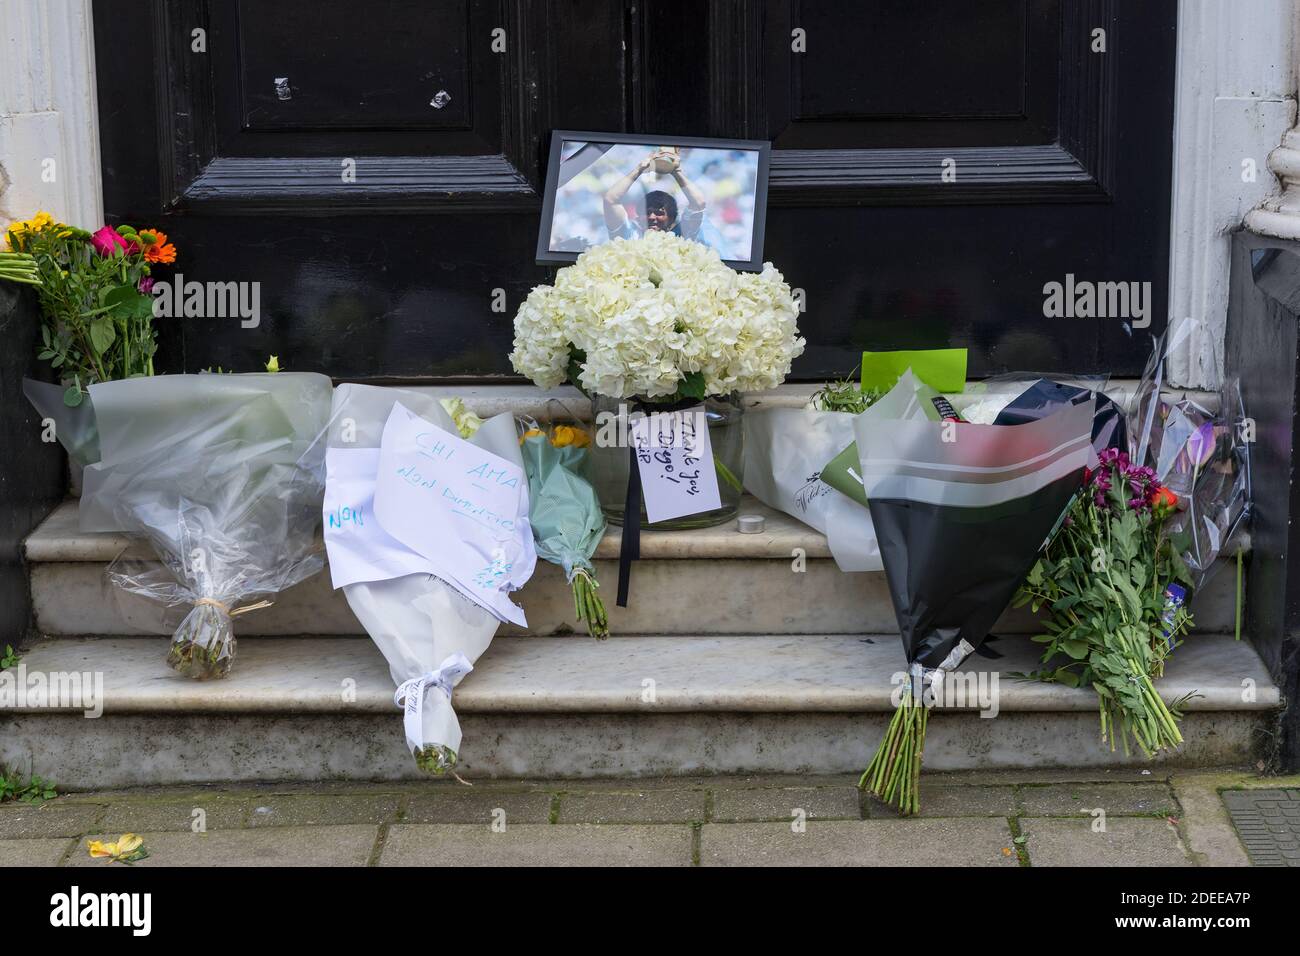 People leave a memorial outside the Argentine Embassy for Diego Maradona after his death. London Stock Photo